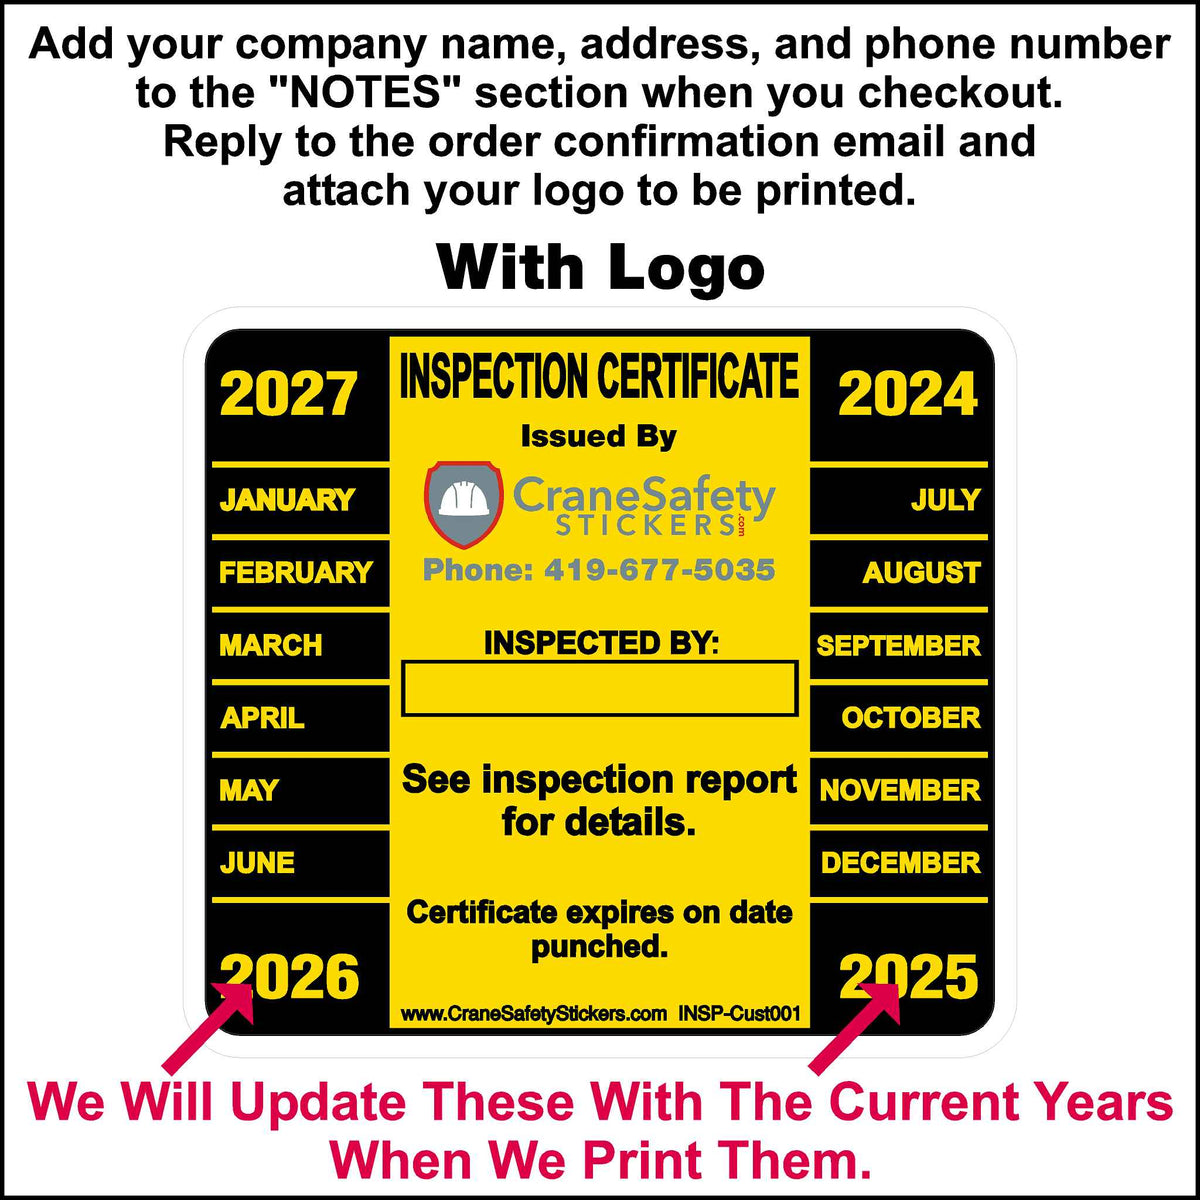 Custom Annual Inspection Sticker printed with your company, logo, address, and phone number. The Colors are yellow and black and it has all 12 months and 4 consecutive years printed in each corner. The user will punch a hole in the month and year the inspection is needed again.